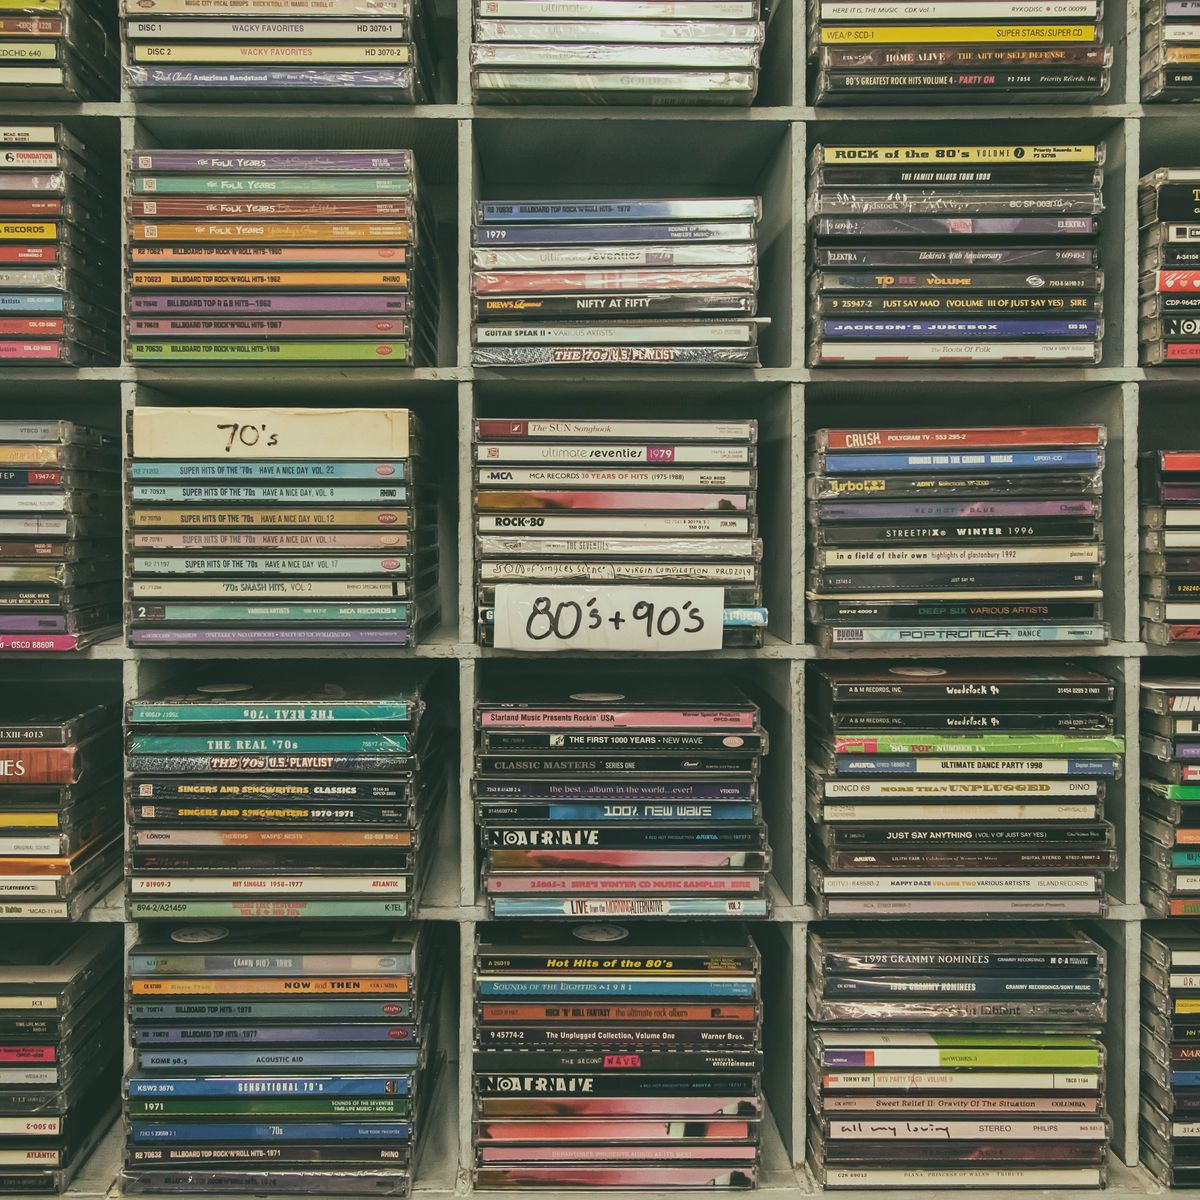 CD Lot of various music 30 CDs